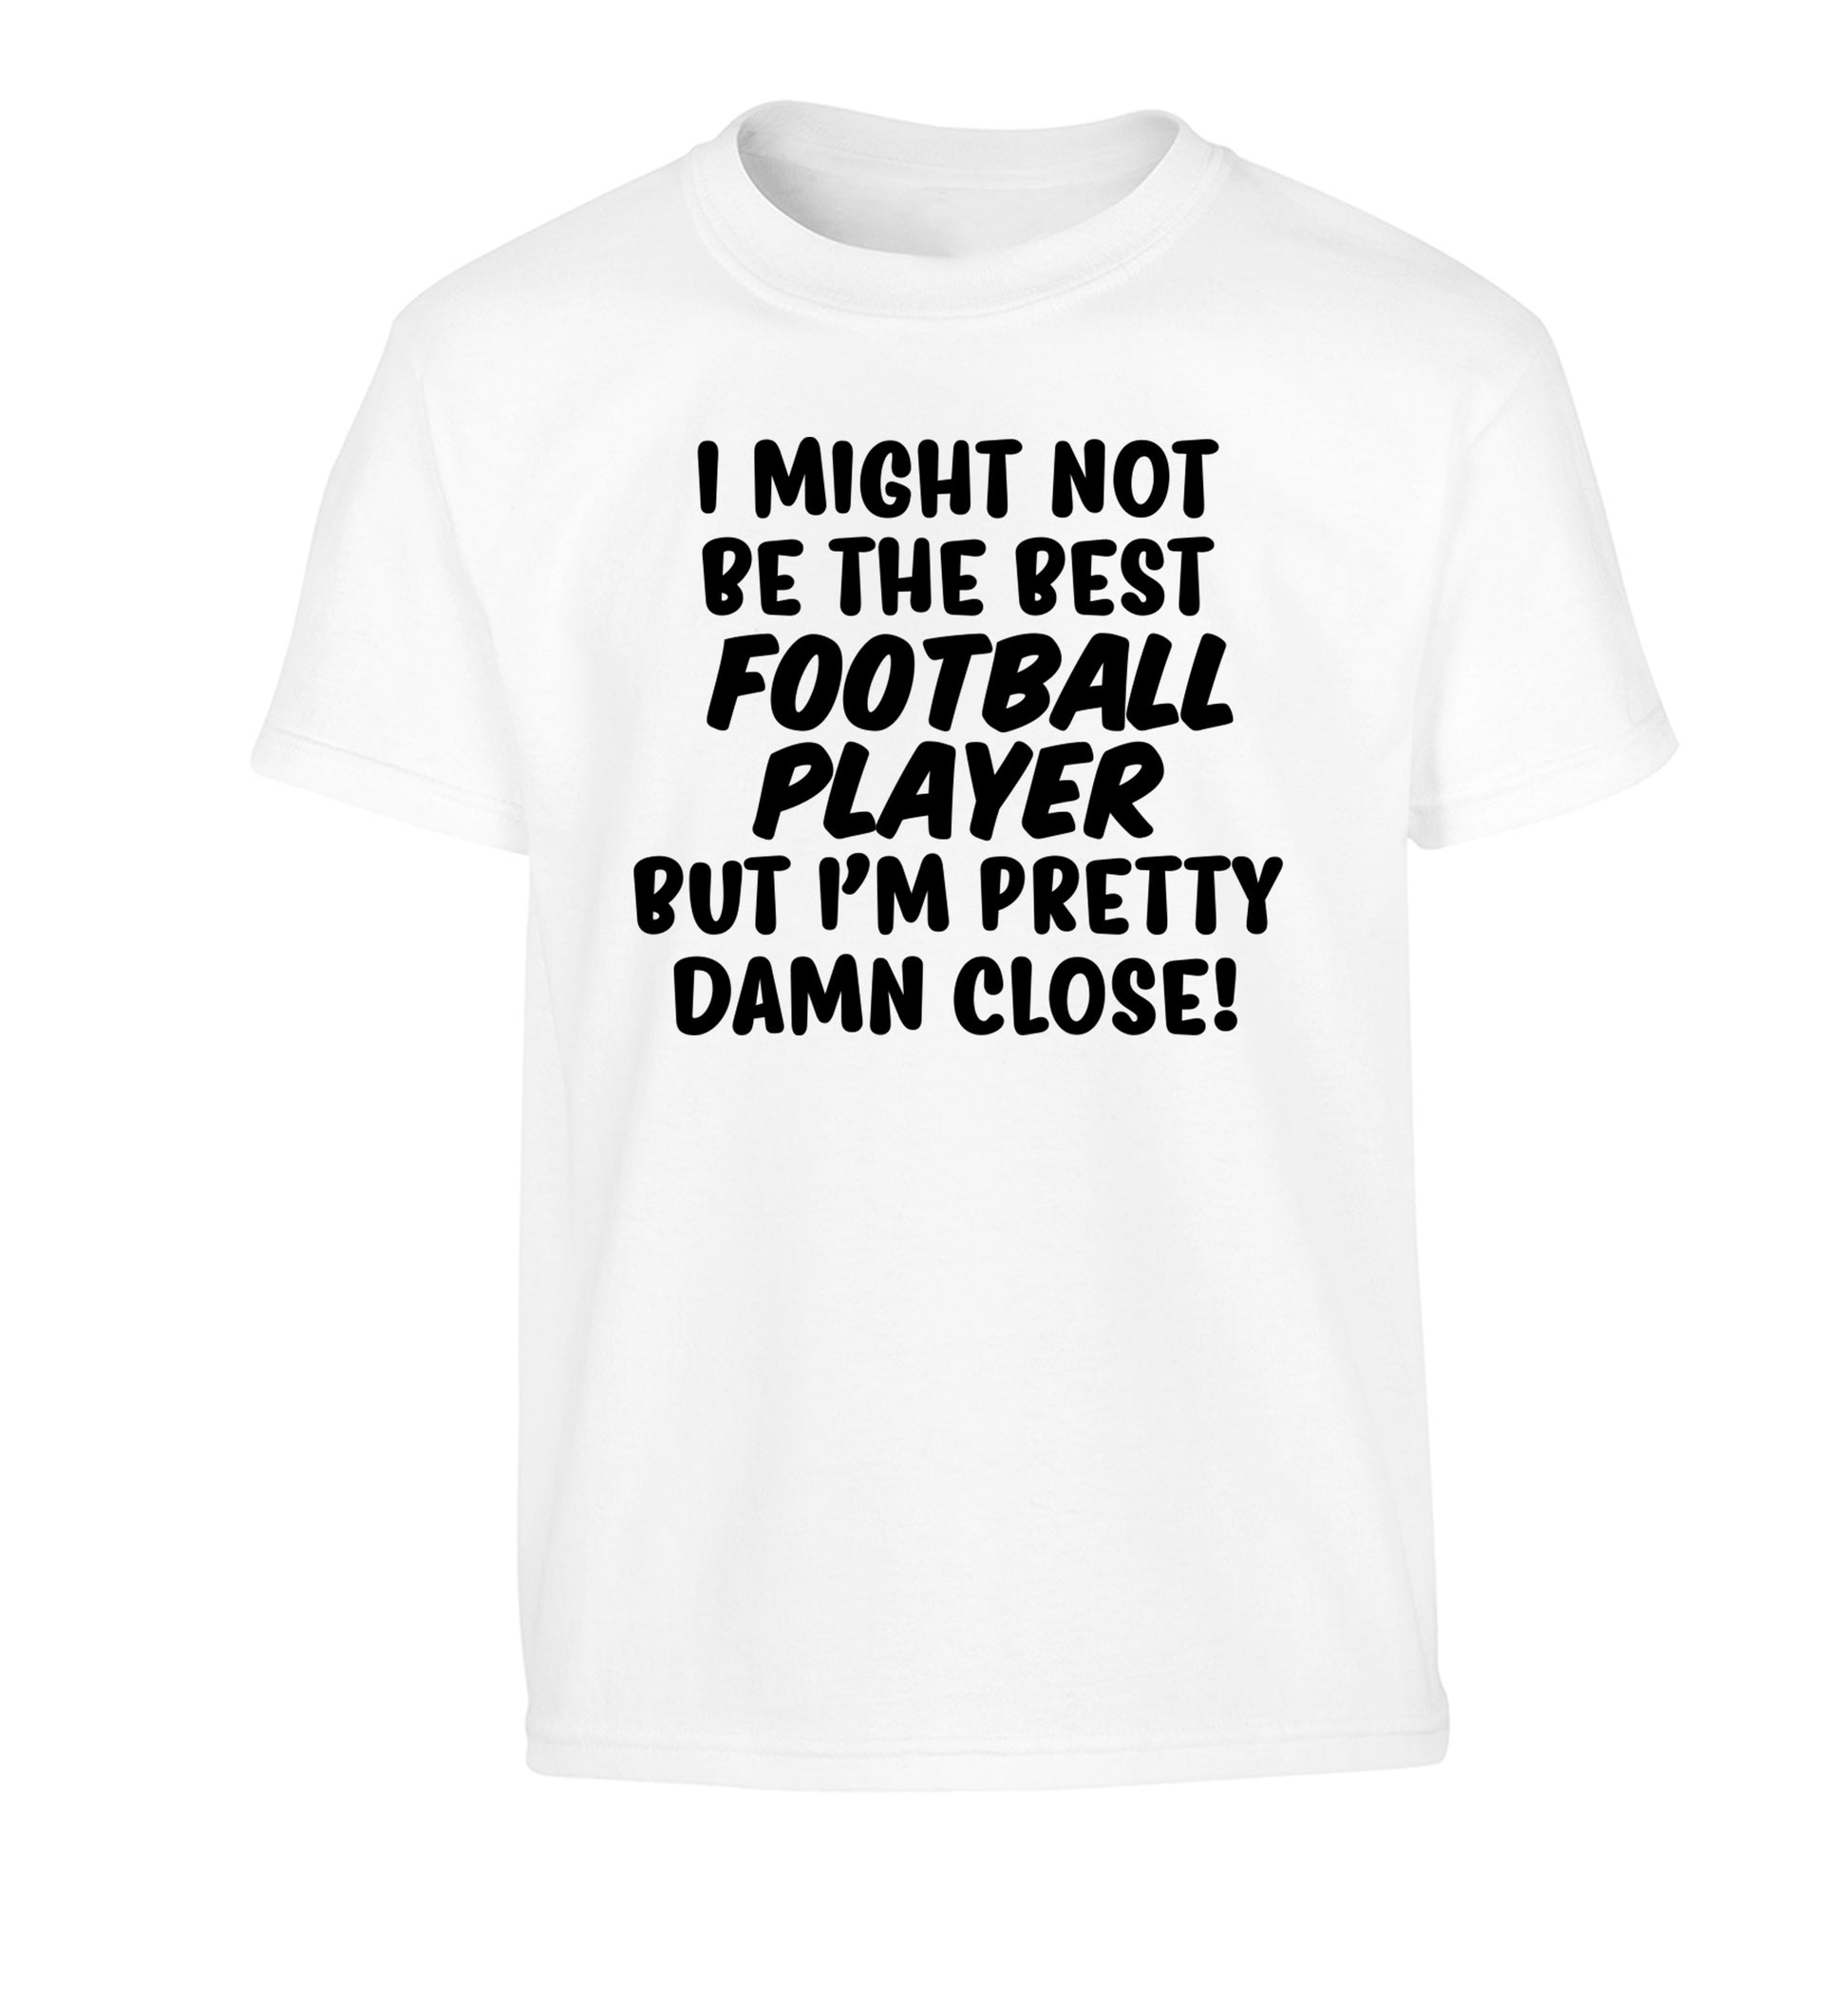 I might not be the best football player but I'm pretty close! Children's white Tshirt 12-14 Years